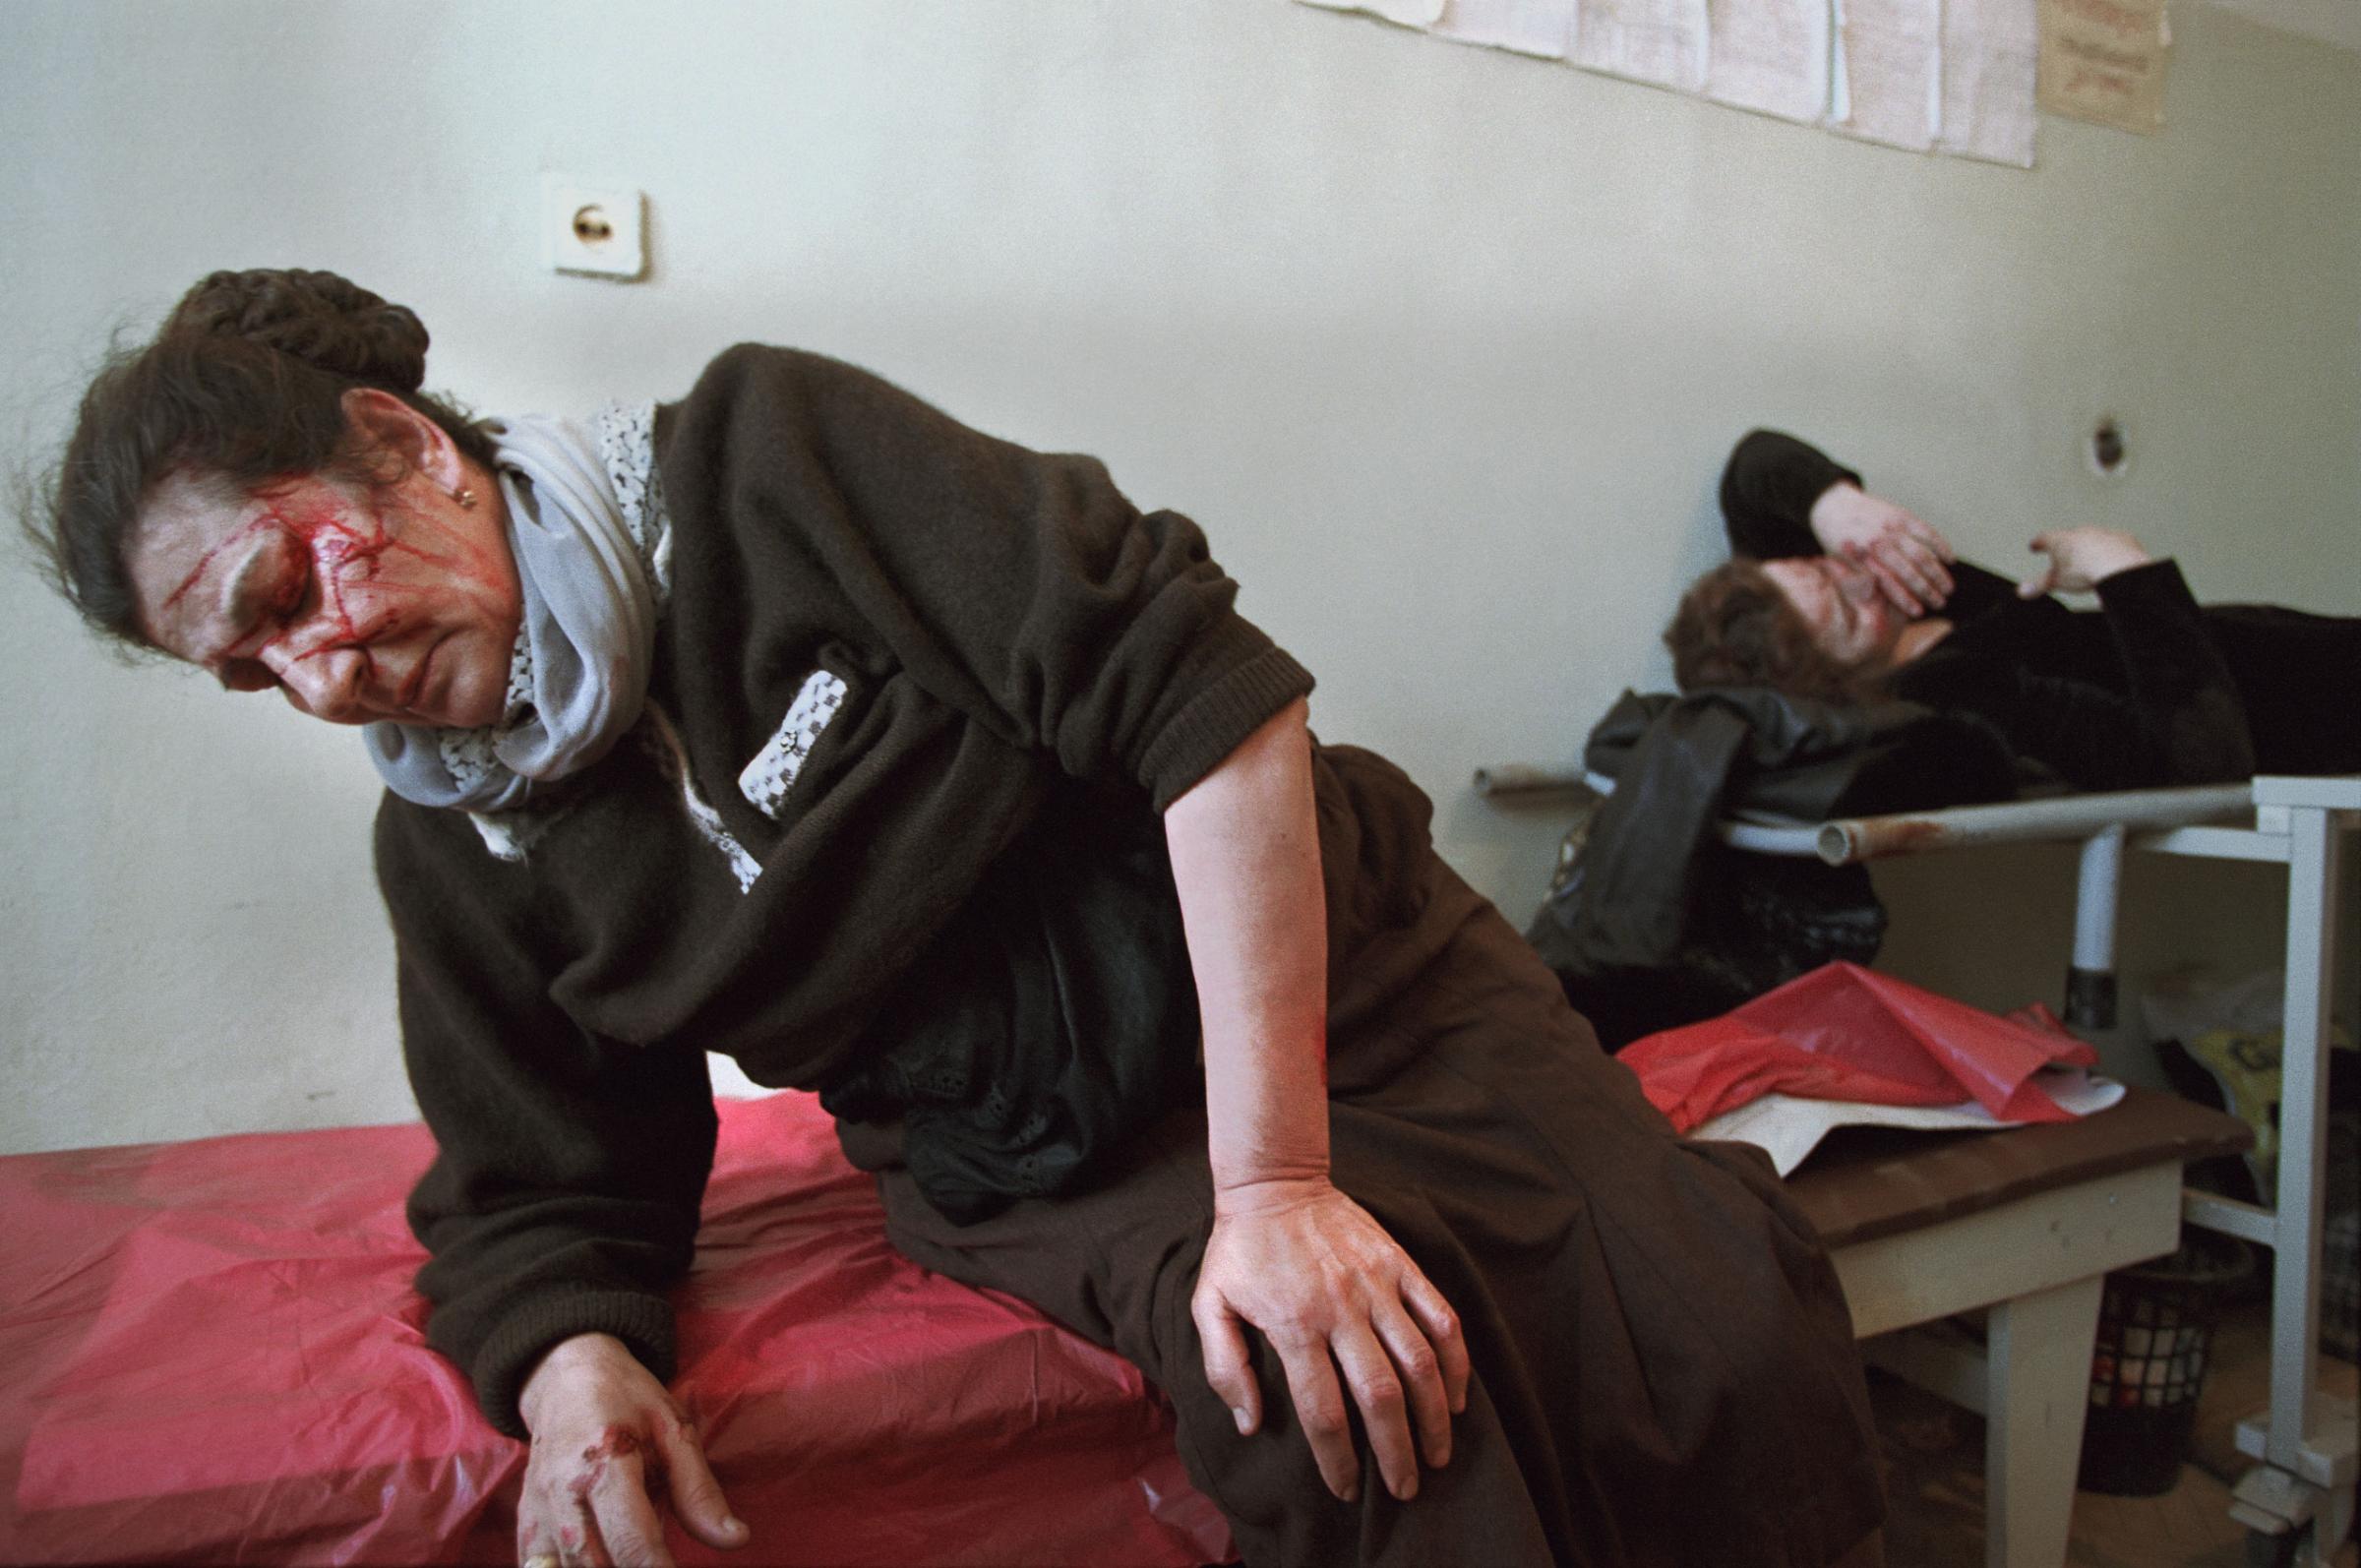 Civilians are treated at a hospital in Grozny, Chechnya, March 2002. More than a dozen were injured after a Russian Army APC ran into a civilian bus. Yuri kozyrev—NOOR